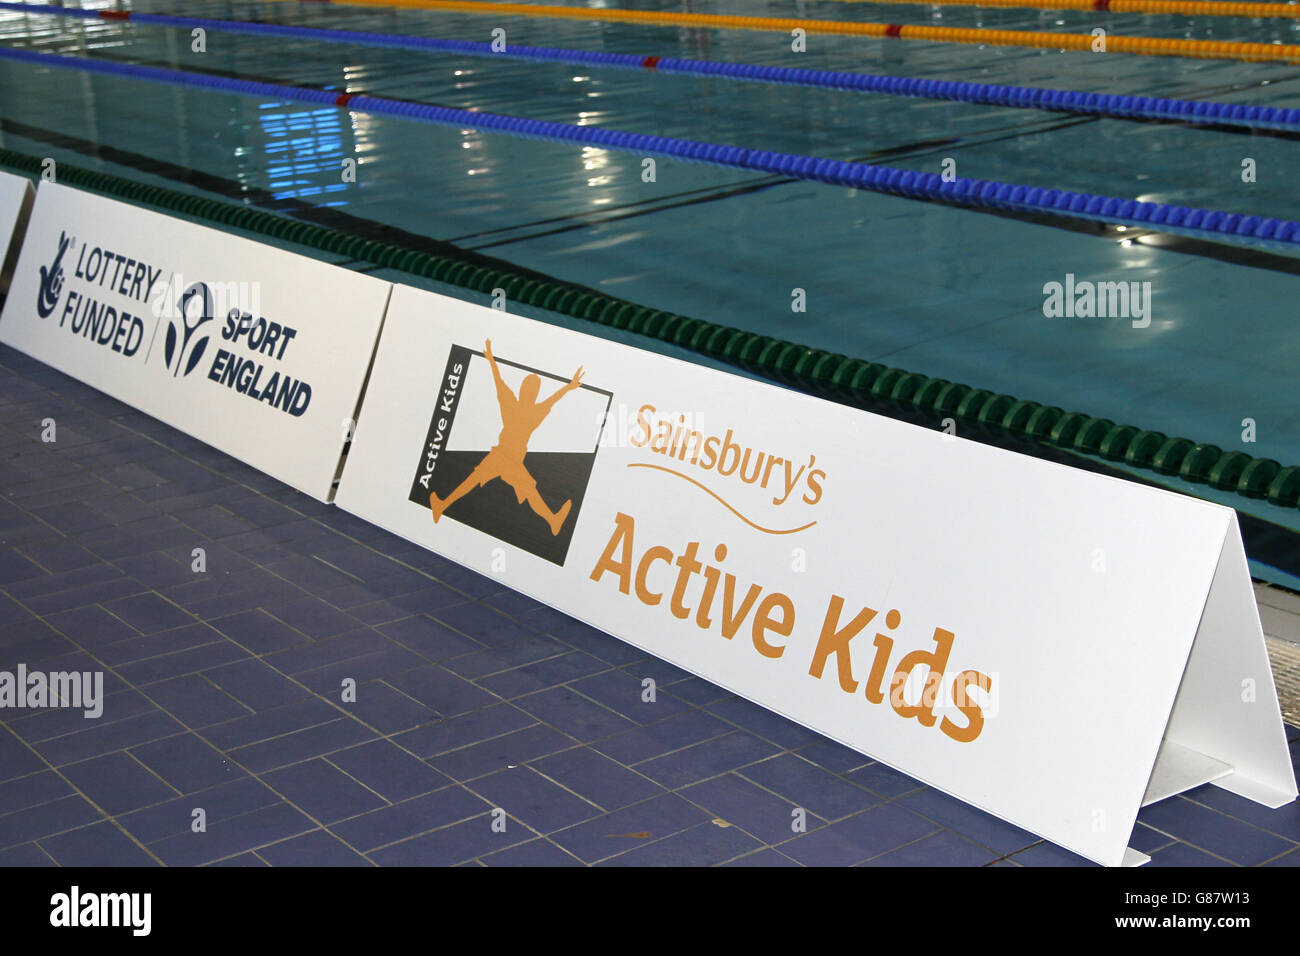 General view of Sainsbury's Active Kids branding at the Sainsbury's 2015 School Games at the Manchester Aquatics Centre. Stock Photo